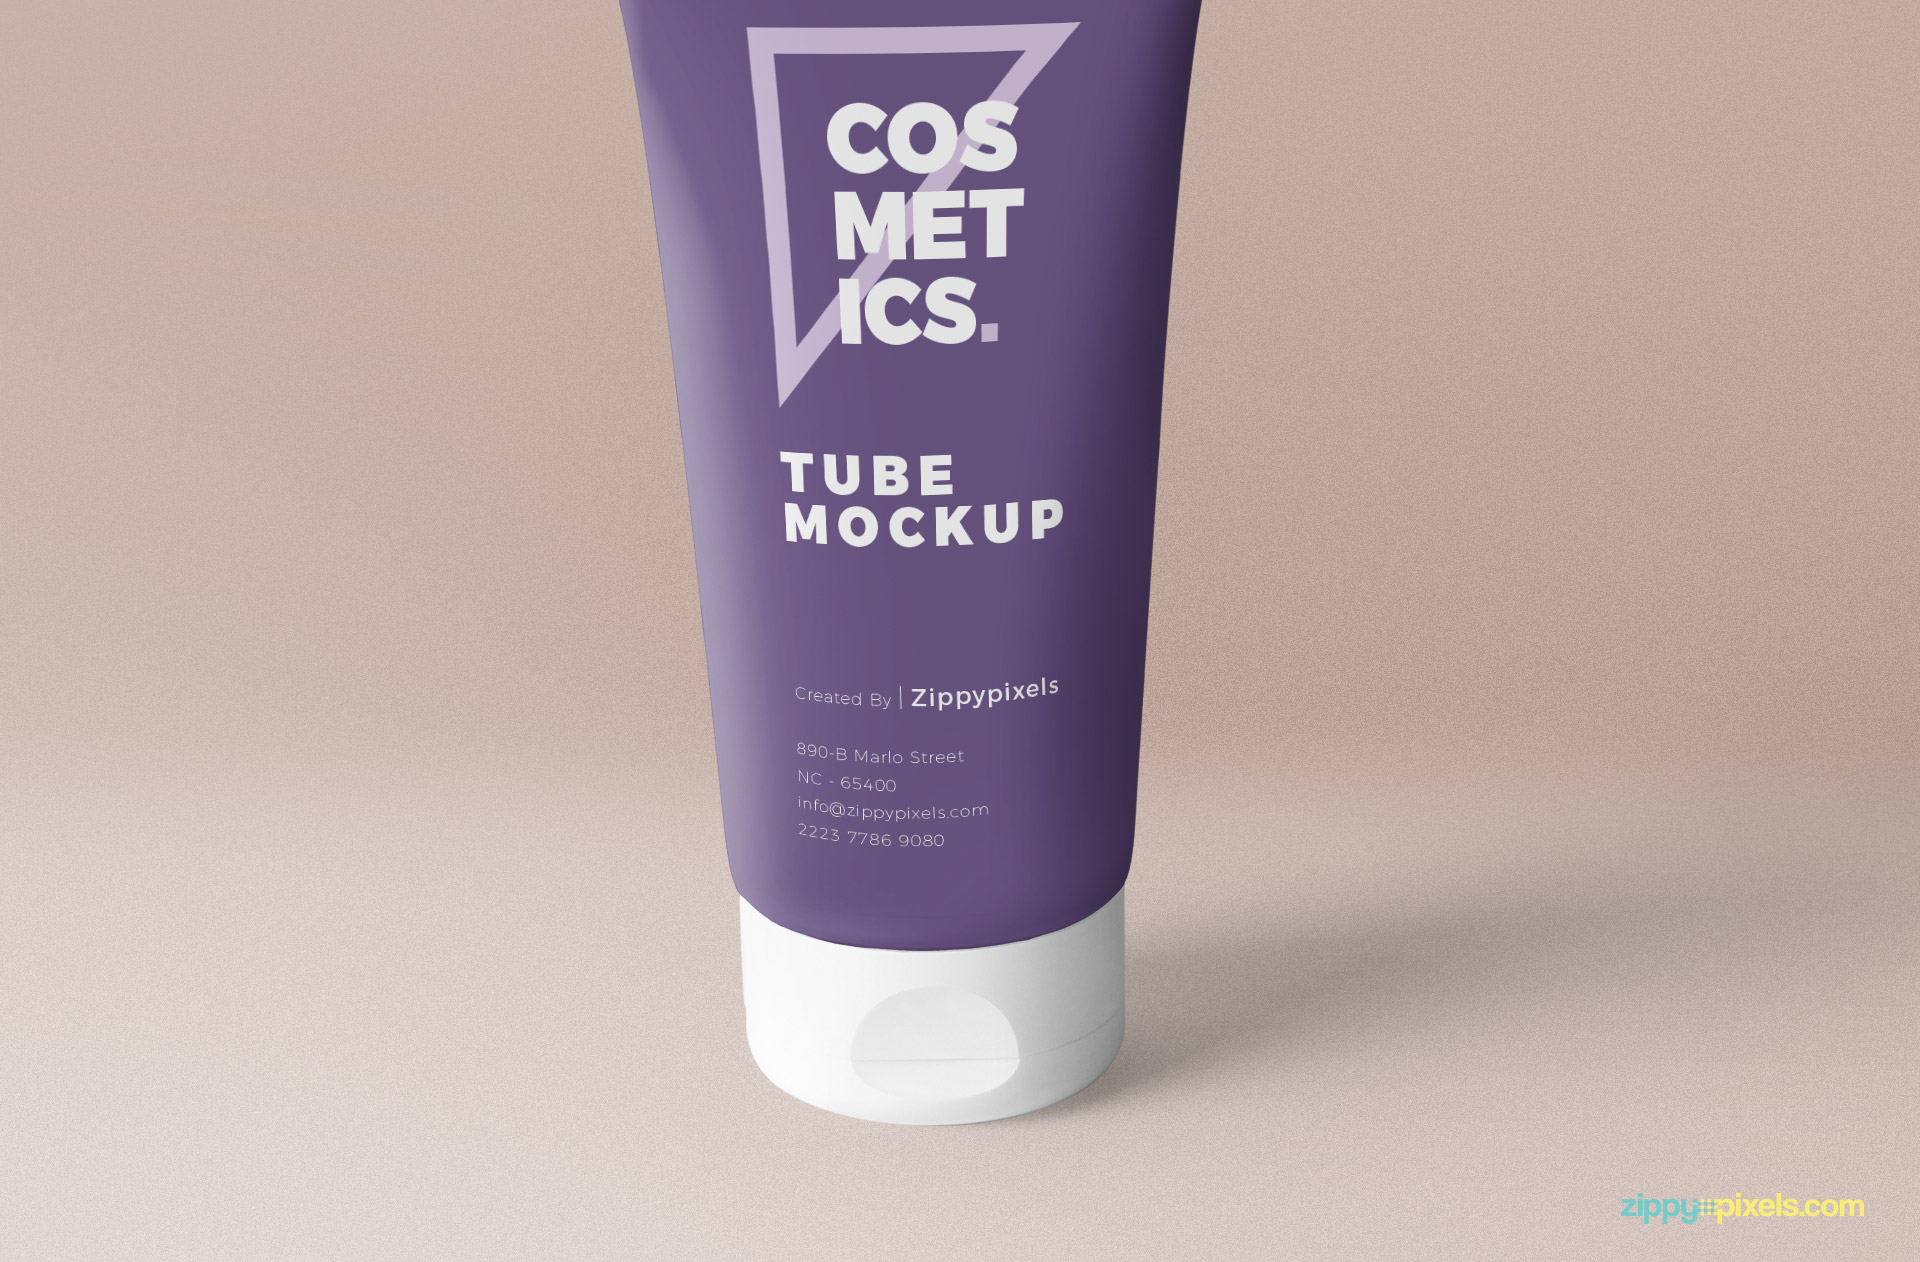 Front design can be changed of this tube packaging mockup.